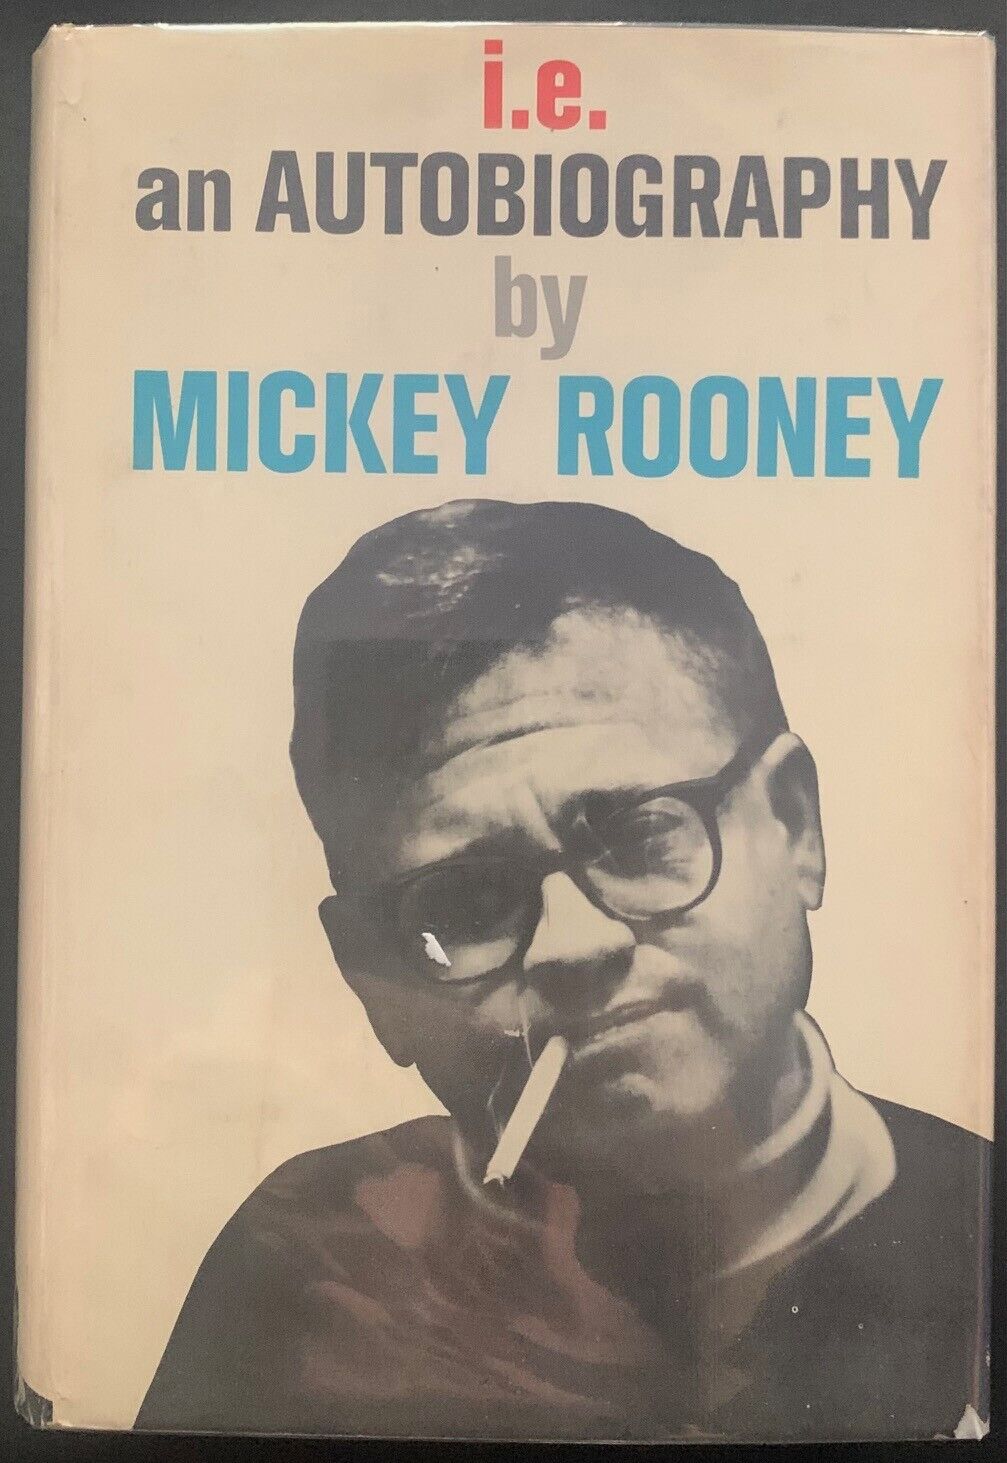 1965 Mickey Rooney Signed Autobiography i.e Hard Cover Book Autograph Vintage